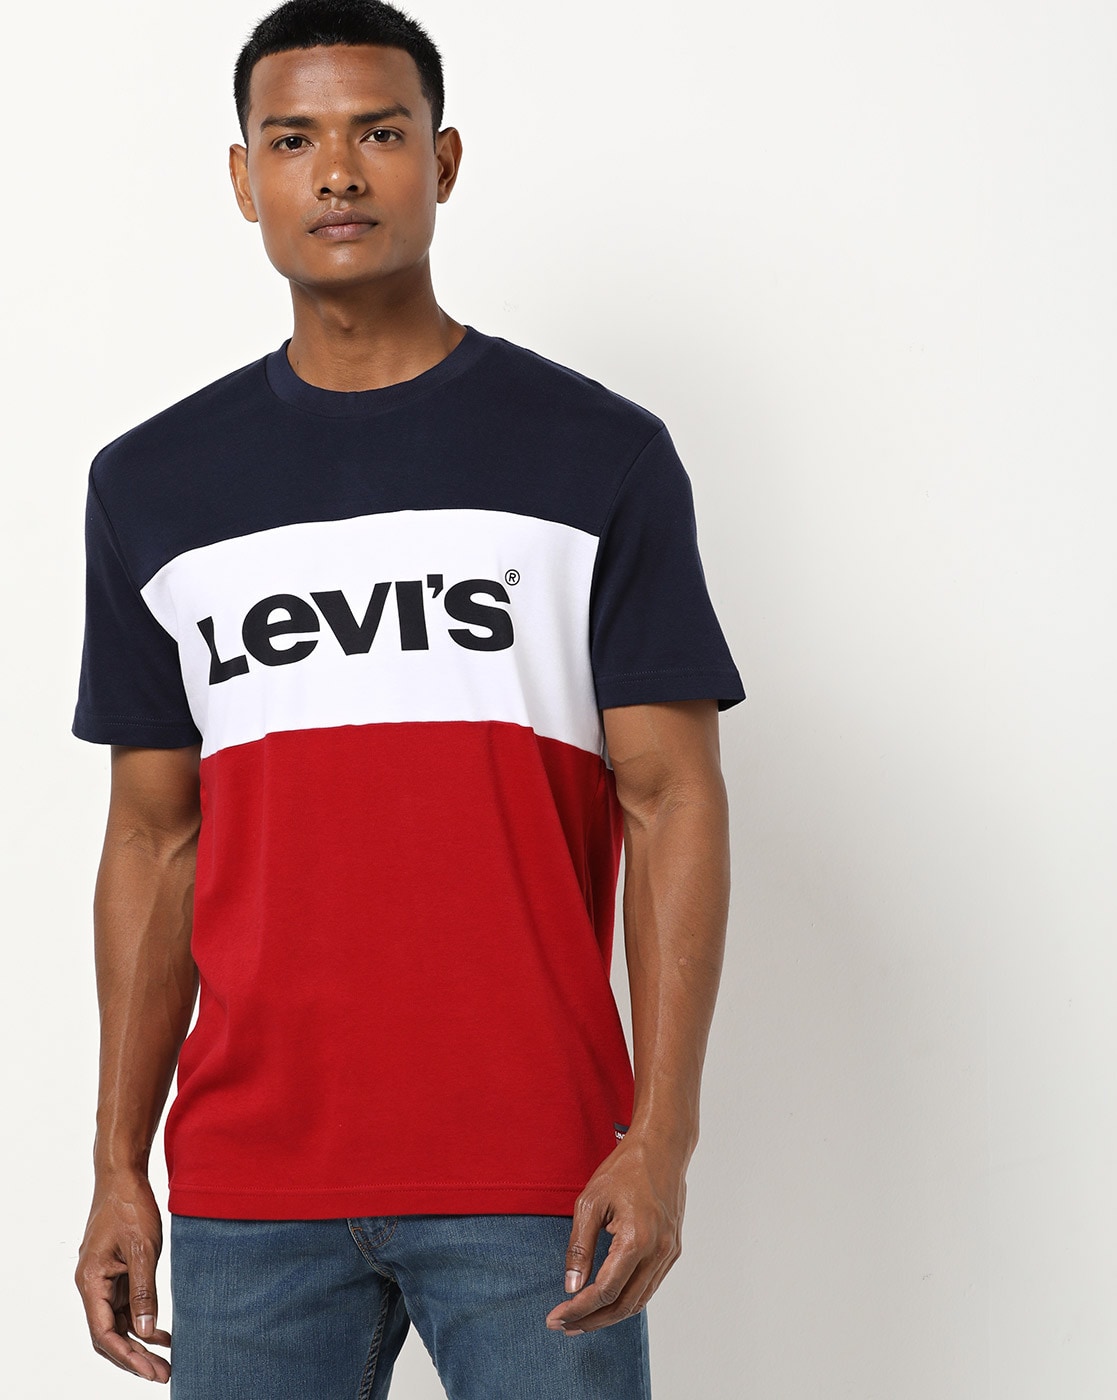 Levis Blue And Red T Shirt Flash Sales, SAVE 53%.